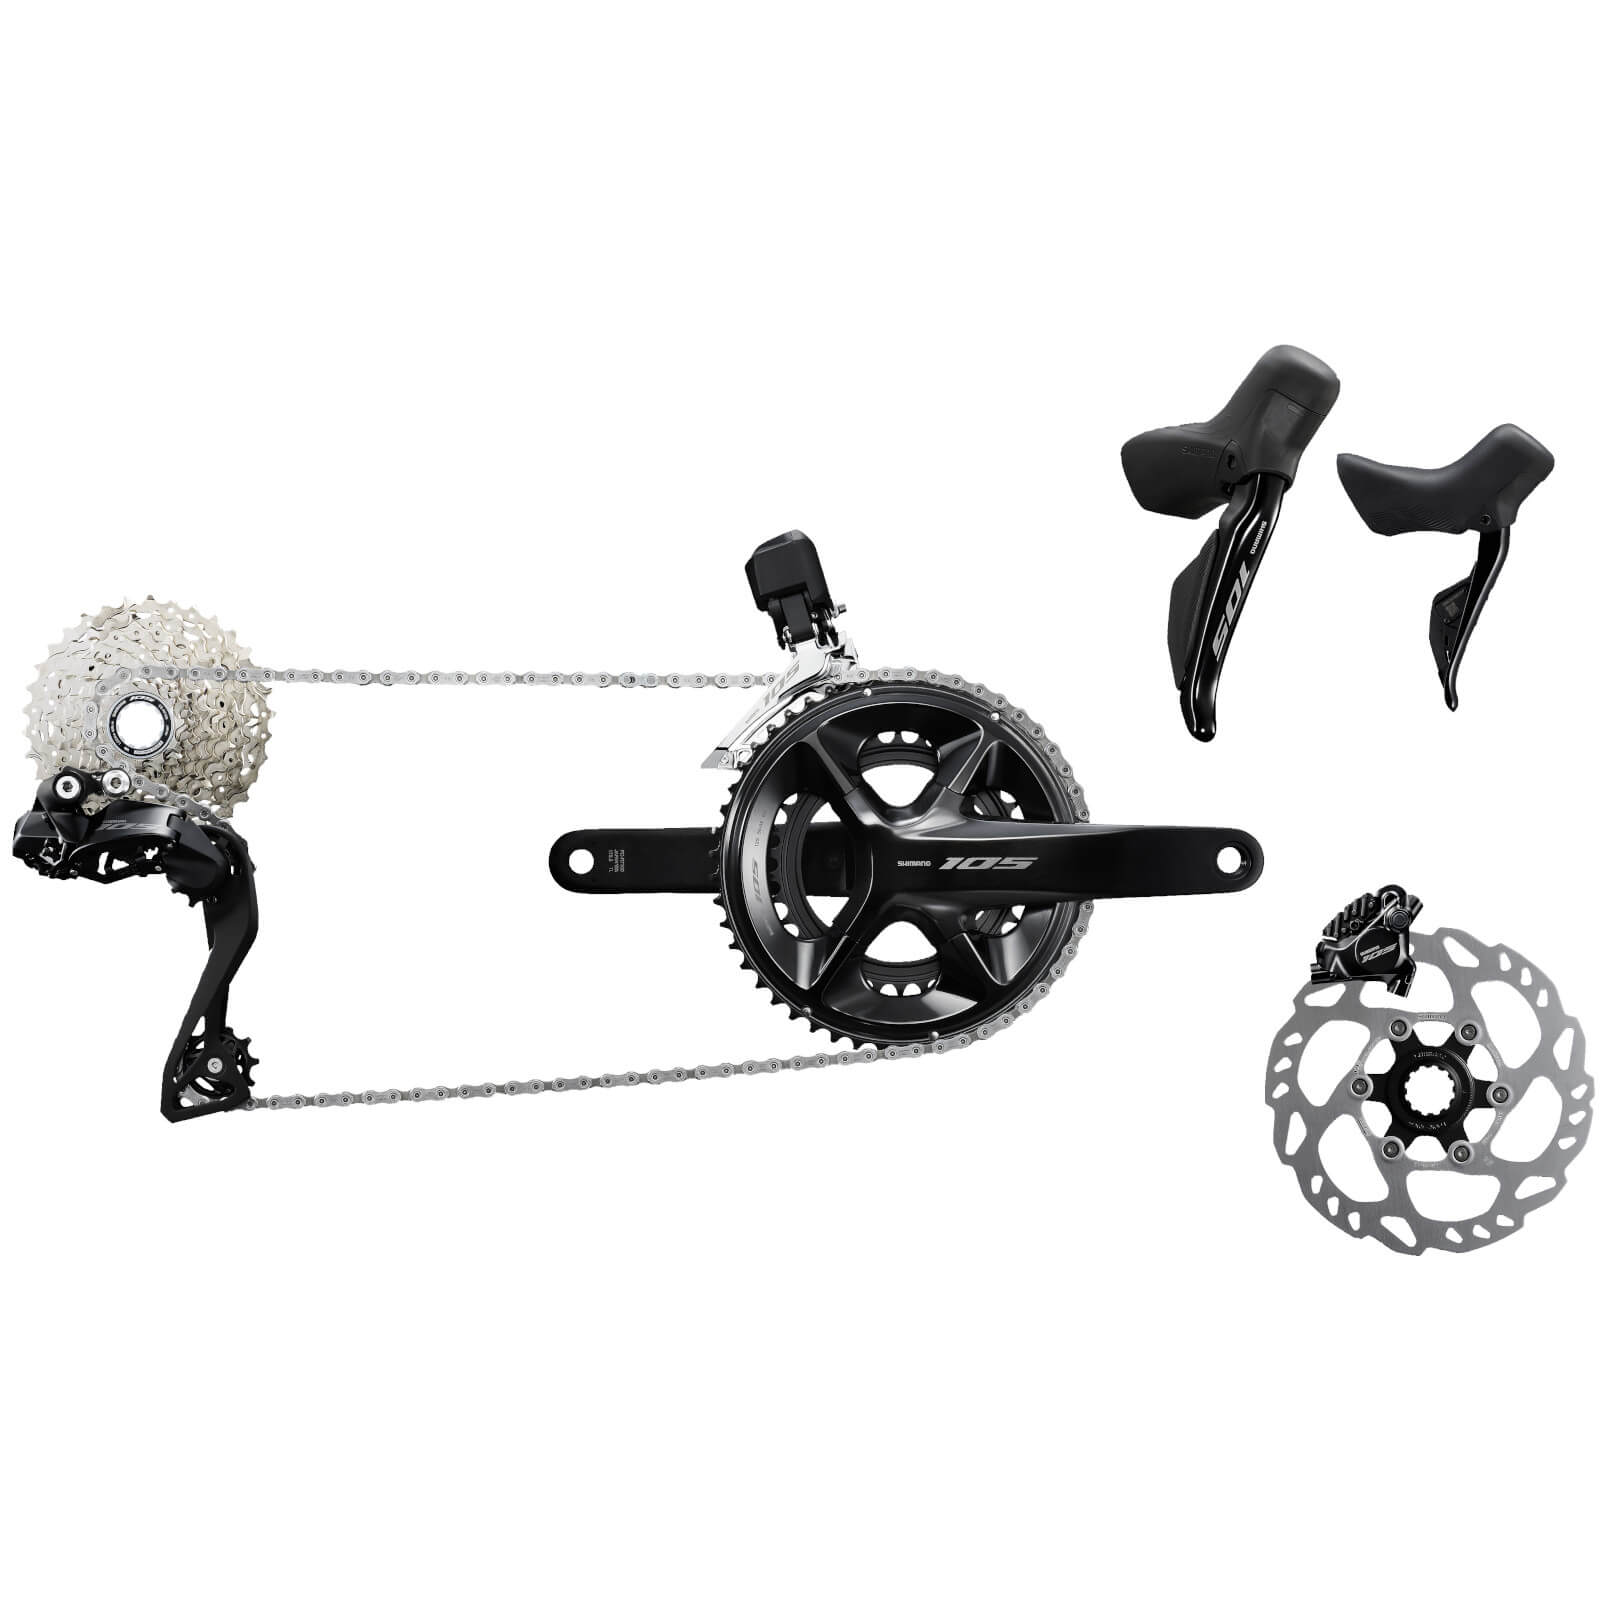 Image of Shimano 105 Di2 Disc 12 Speed Groupset - 172.5mm